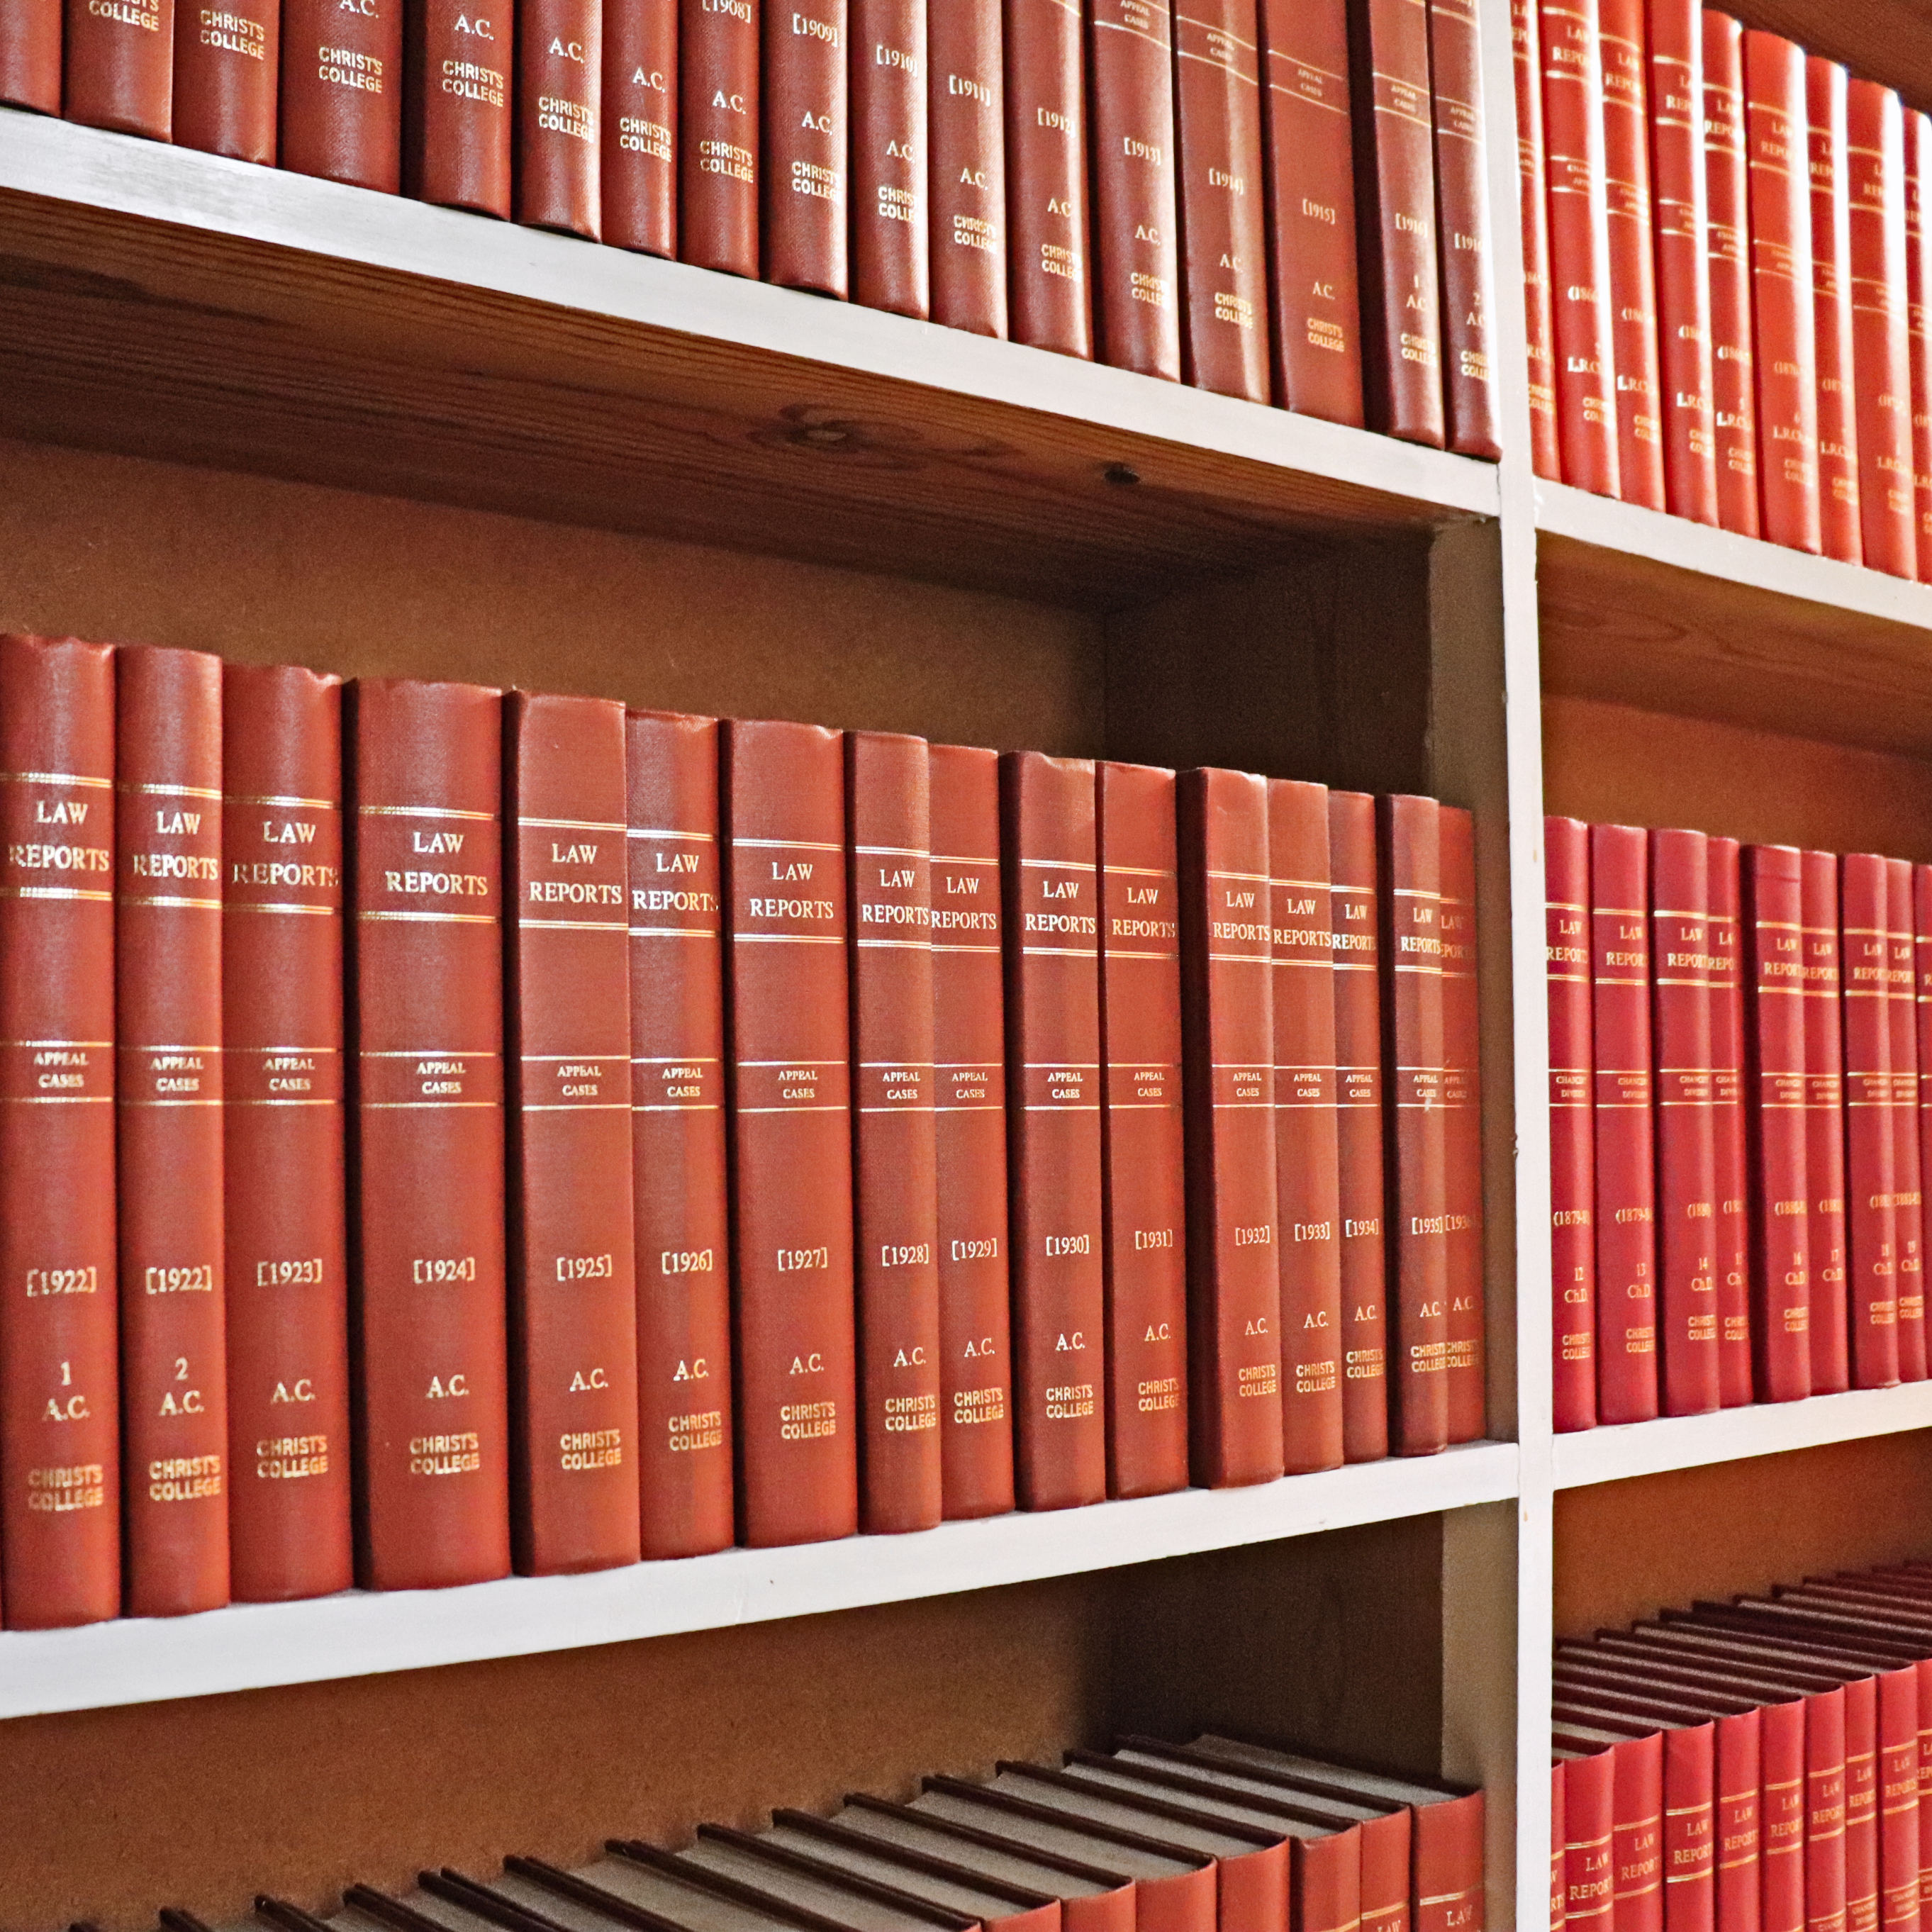 Law journals with brown spines on shelves